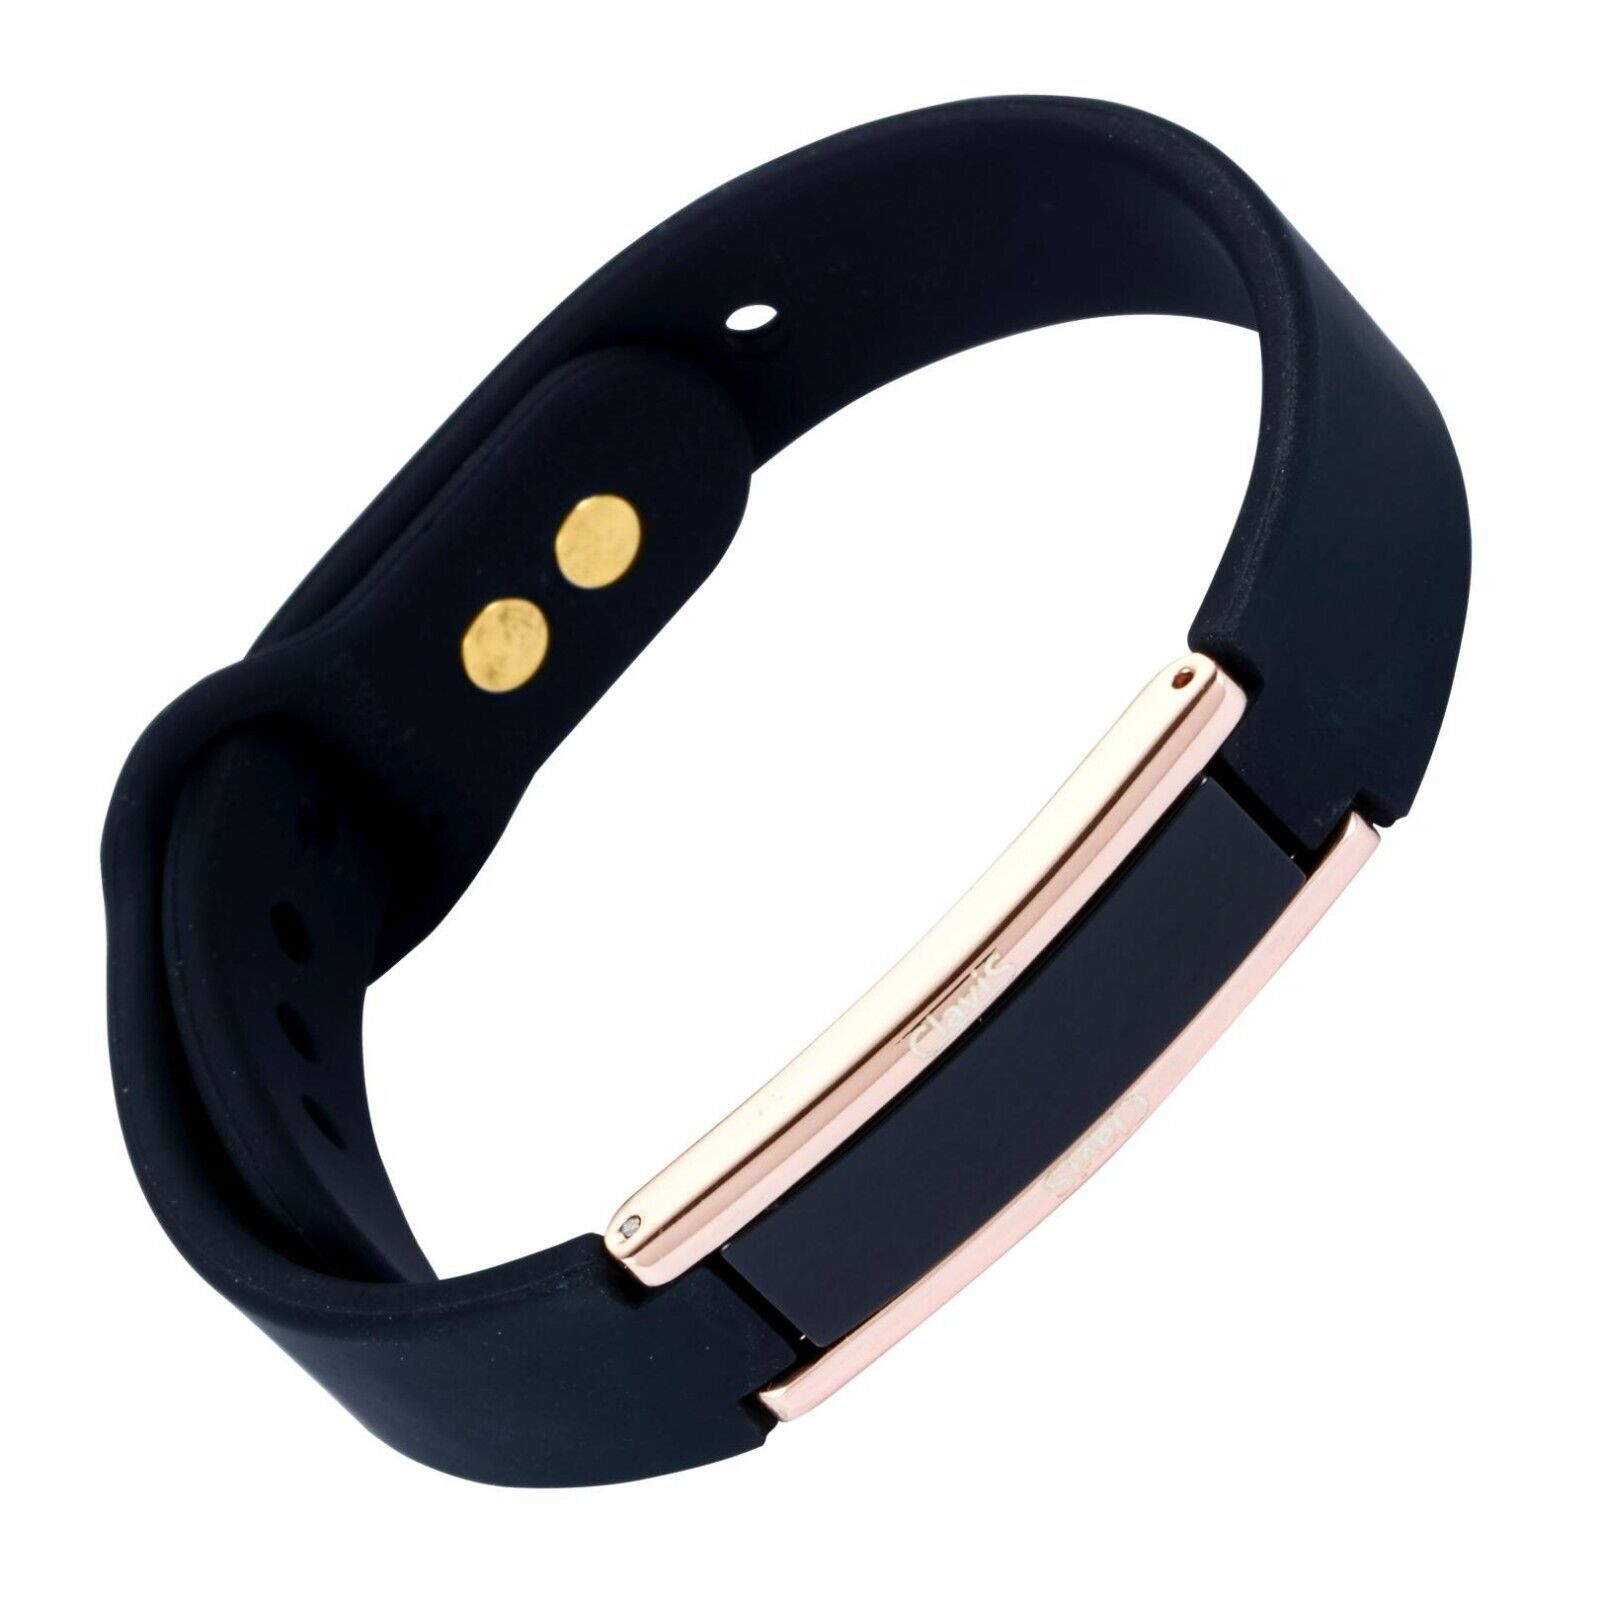 Primary image for CLAVIS  HERA MAGNETIC THERAPY GOLF HEALTH BRACELET BLACK BAND ROSE GOLD-show...